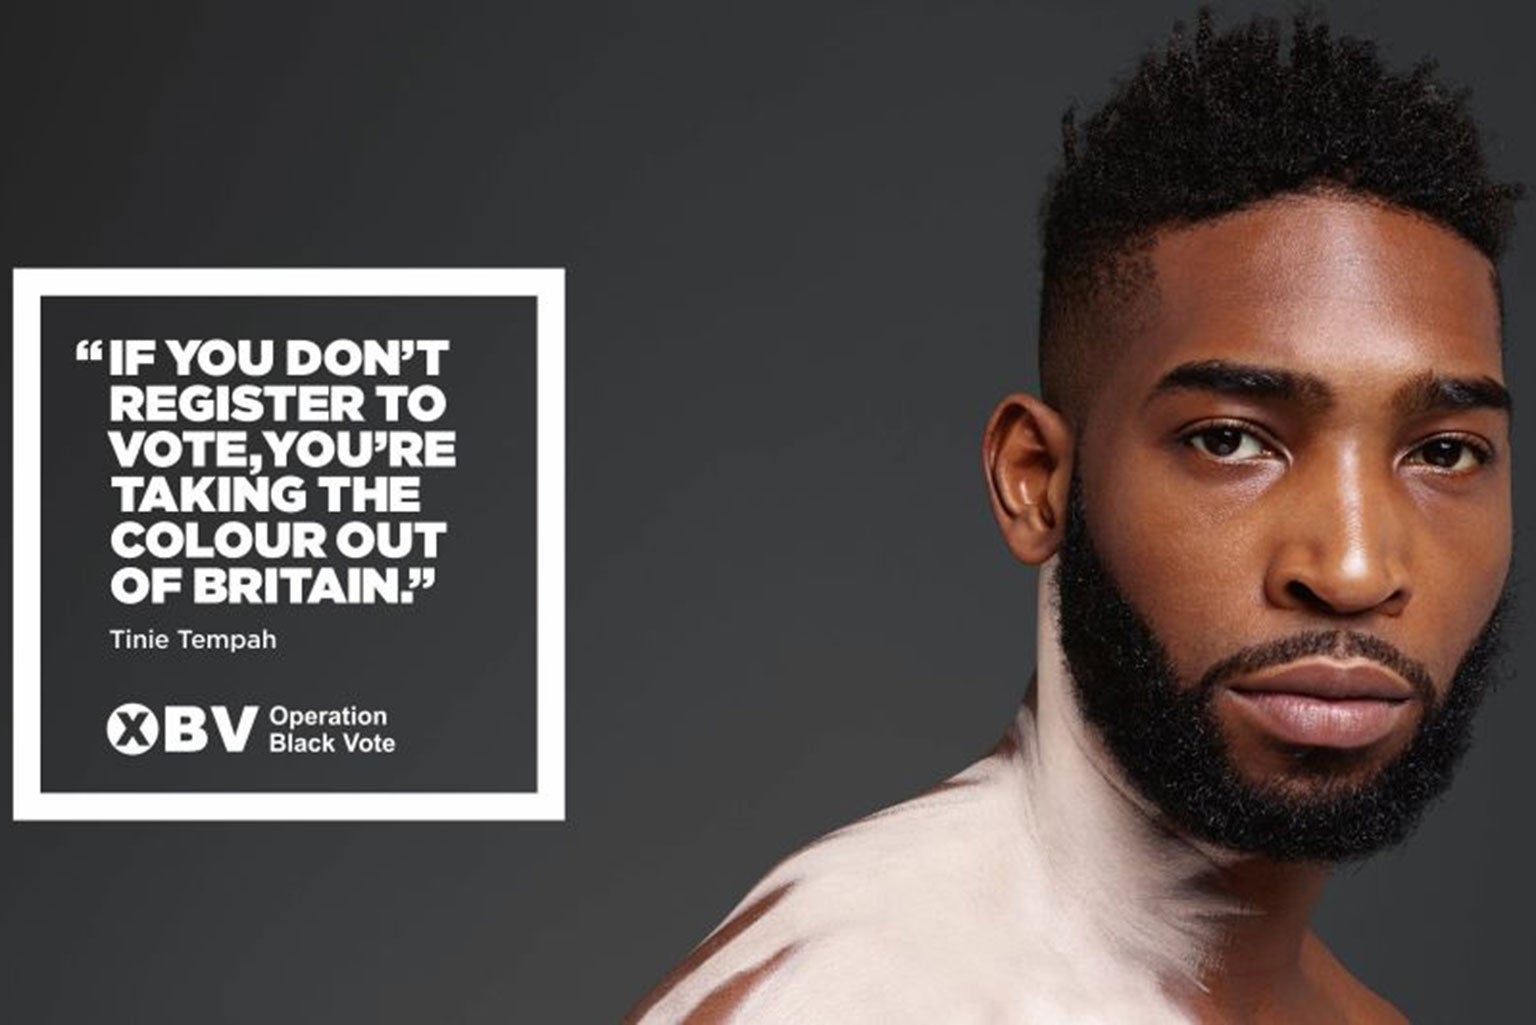 Tinie Tempah poses with streaks of white paint down his back in a photo taken by Rankin